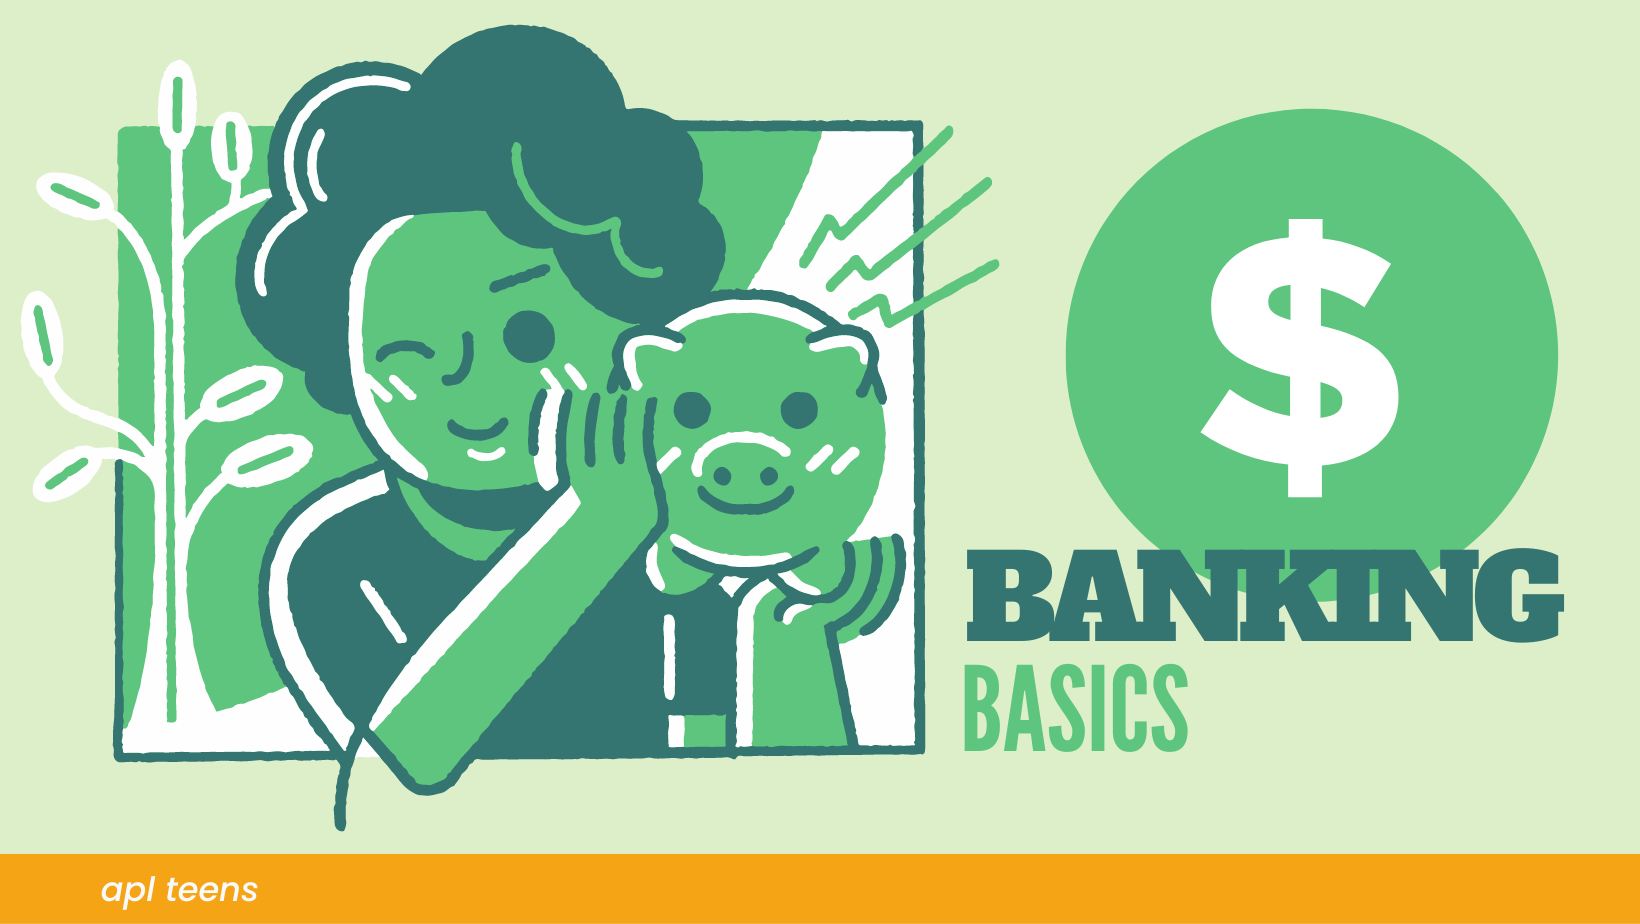 An illustration of a person holding a piggy bank with the text BANKING BASICS on the right. On the bottom of the image is a yellow banner that says a p l teens.